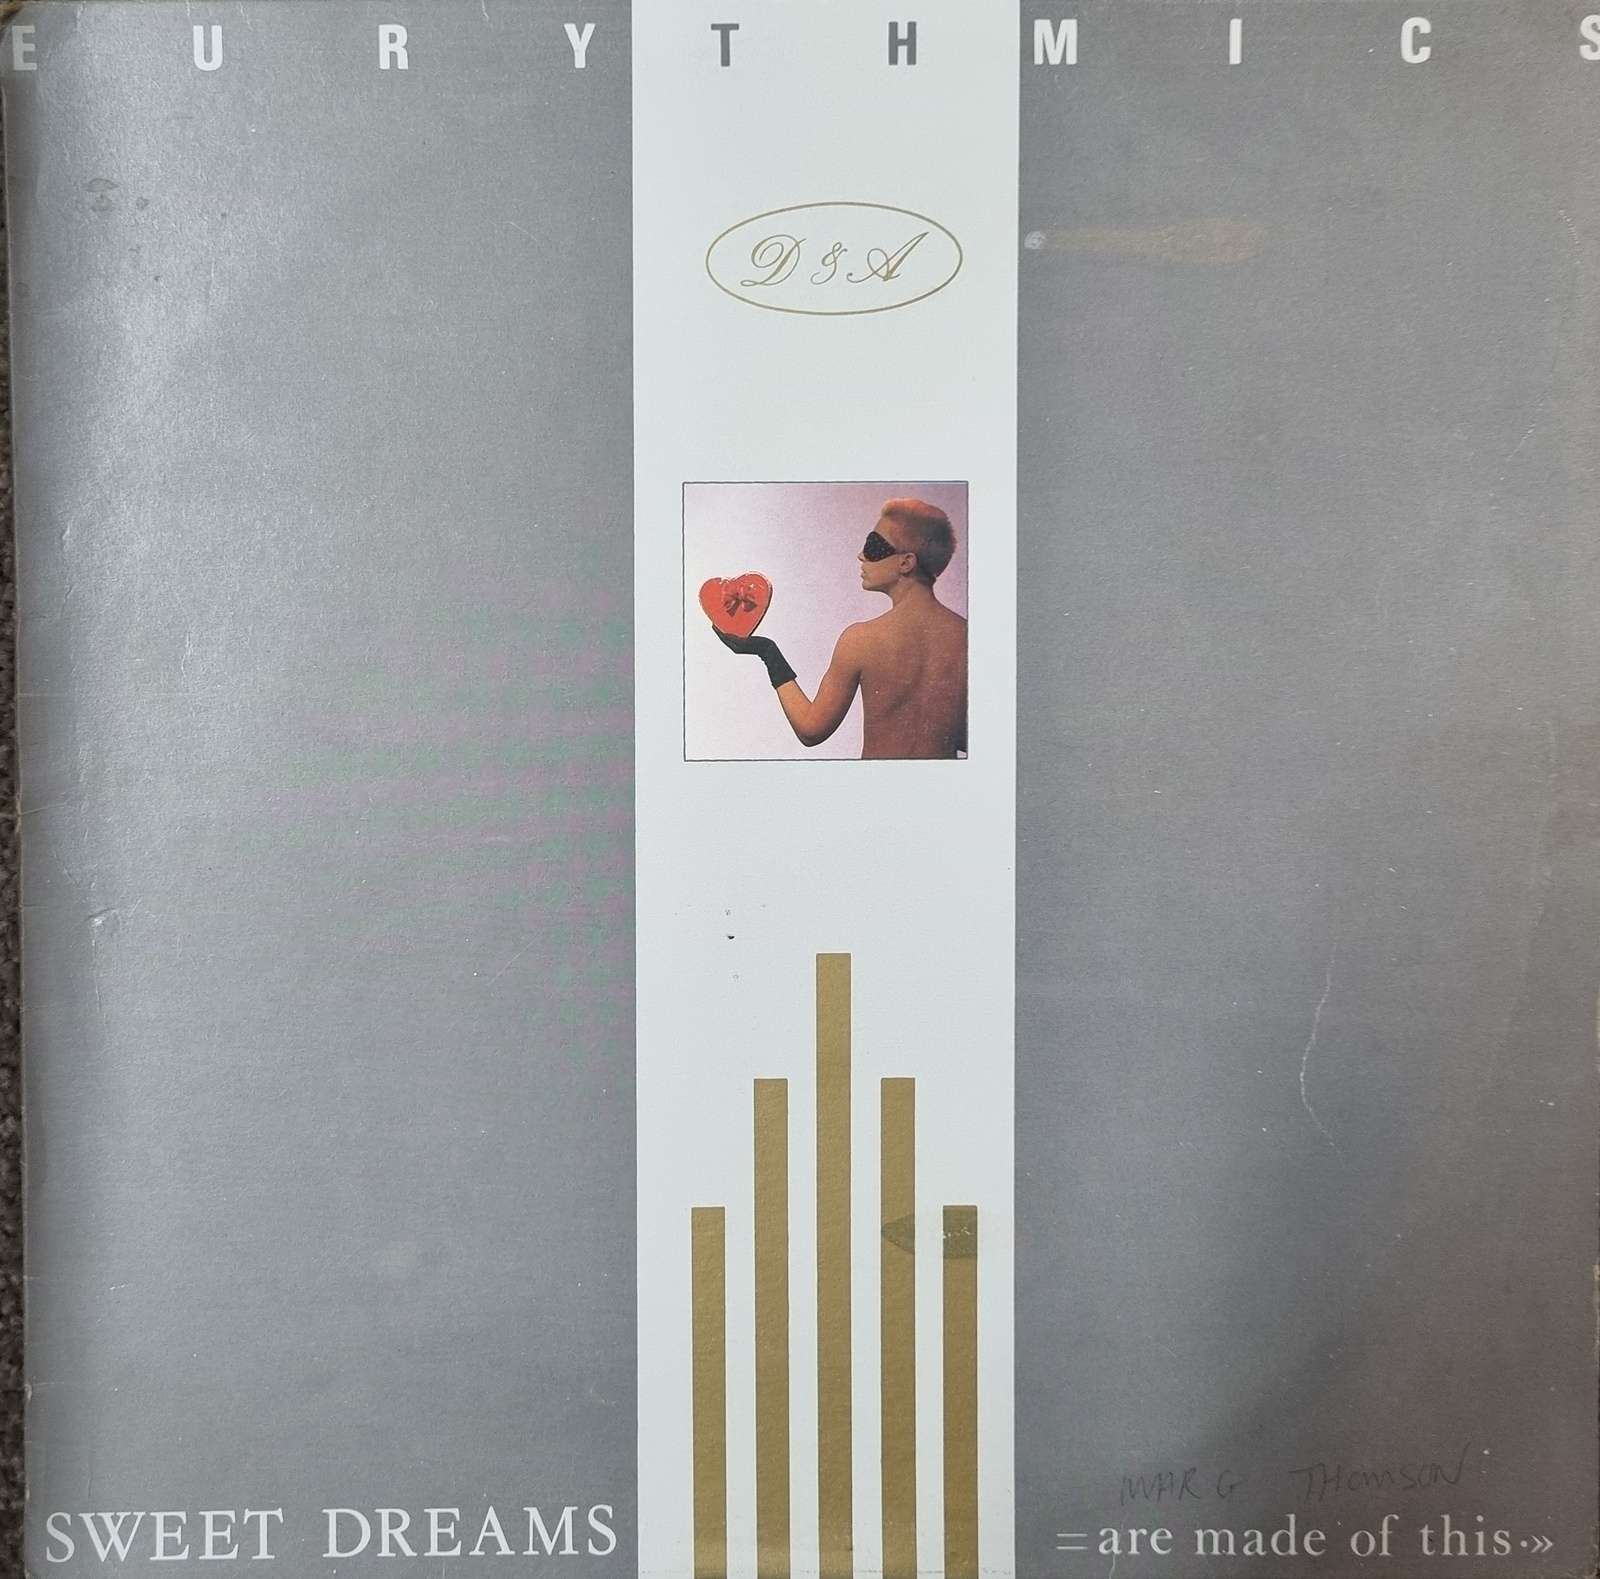 Eurythmics - Sweet Dreams are Made of This (LP)